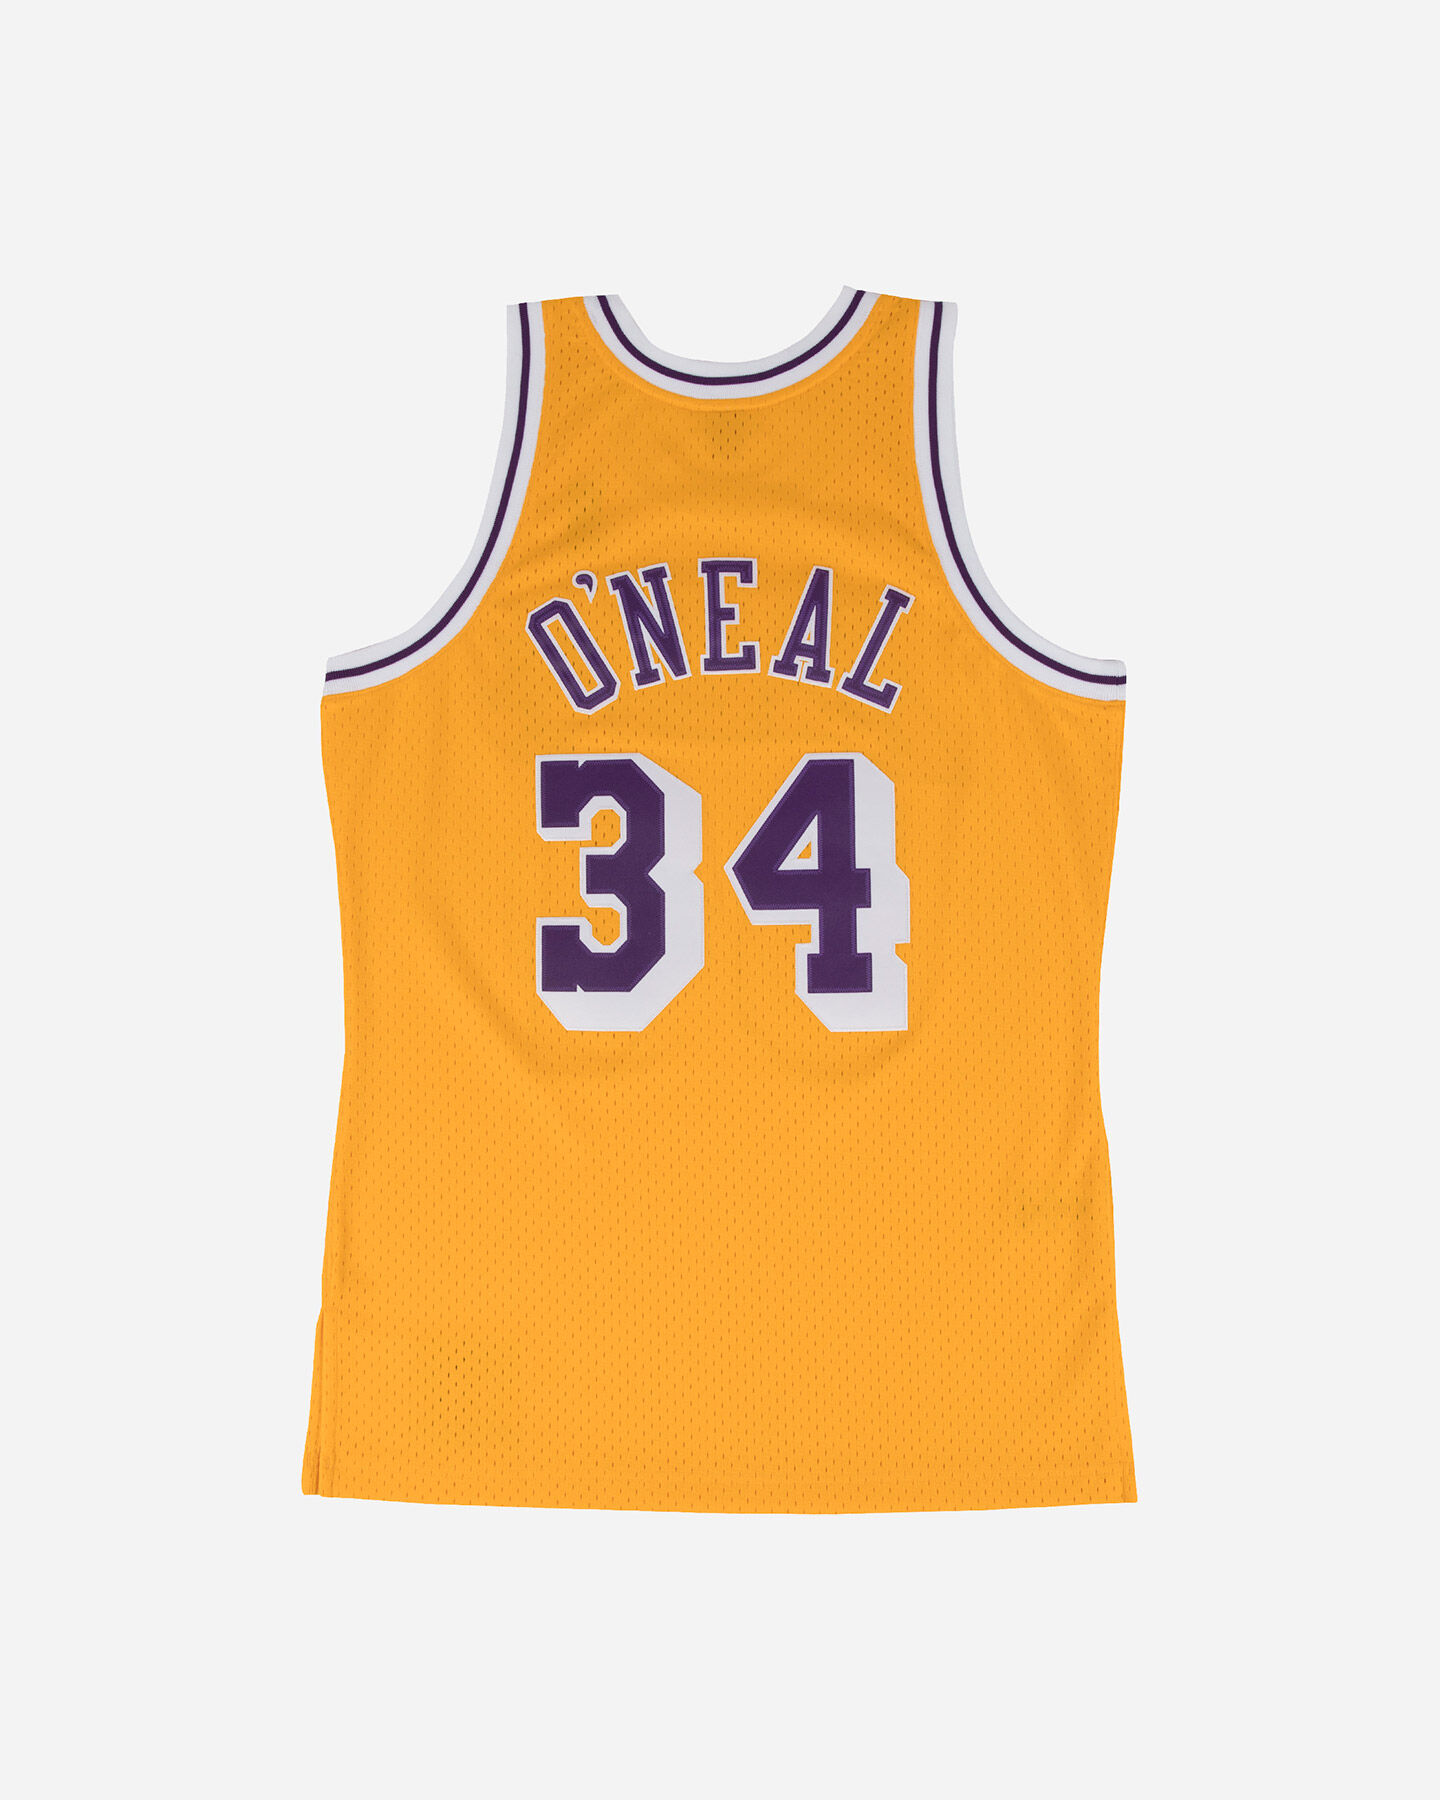  Canotta basket MITCHELL&NESS NBA LOS ANGELES LAKERS SHAQUILLE O'NEAL '96 IC M S4100057|001|S scatto 1